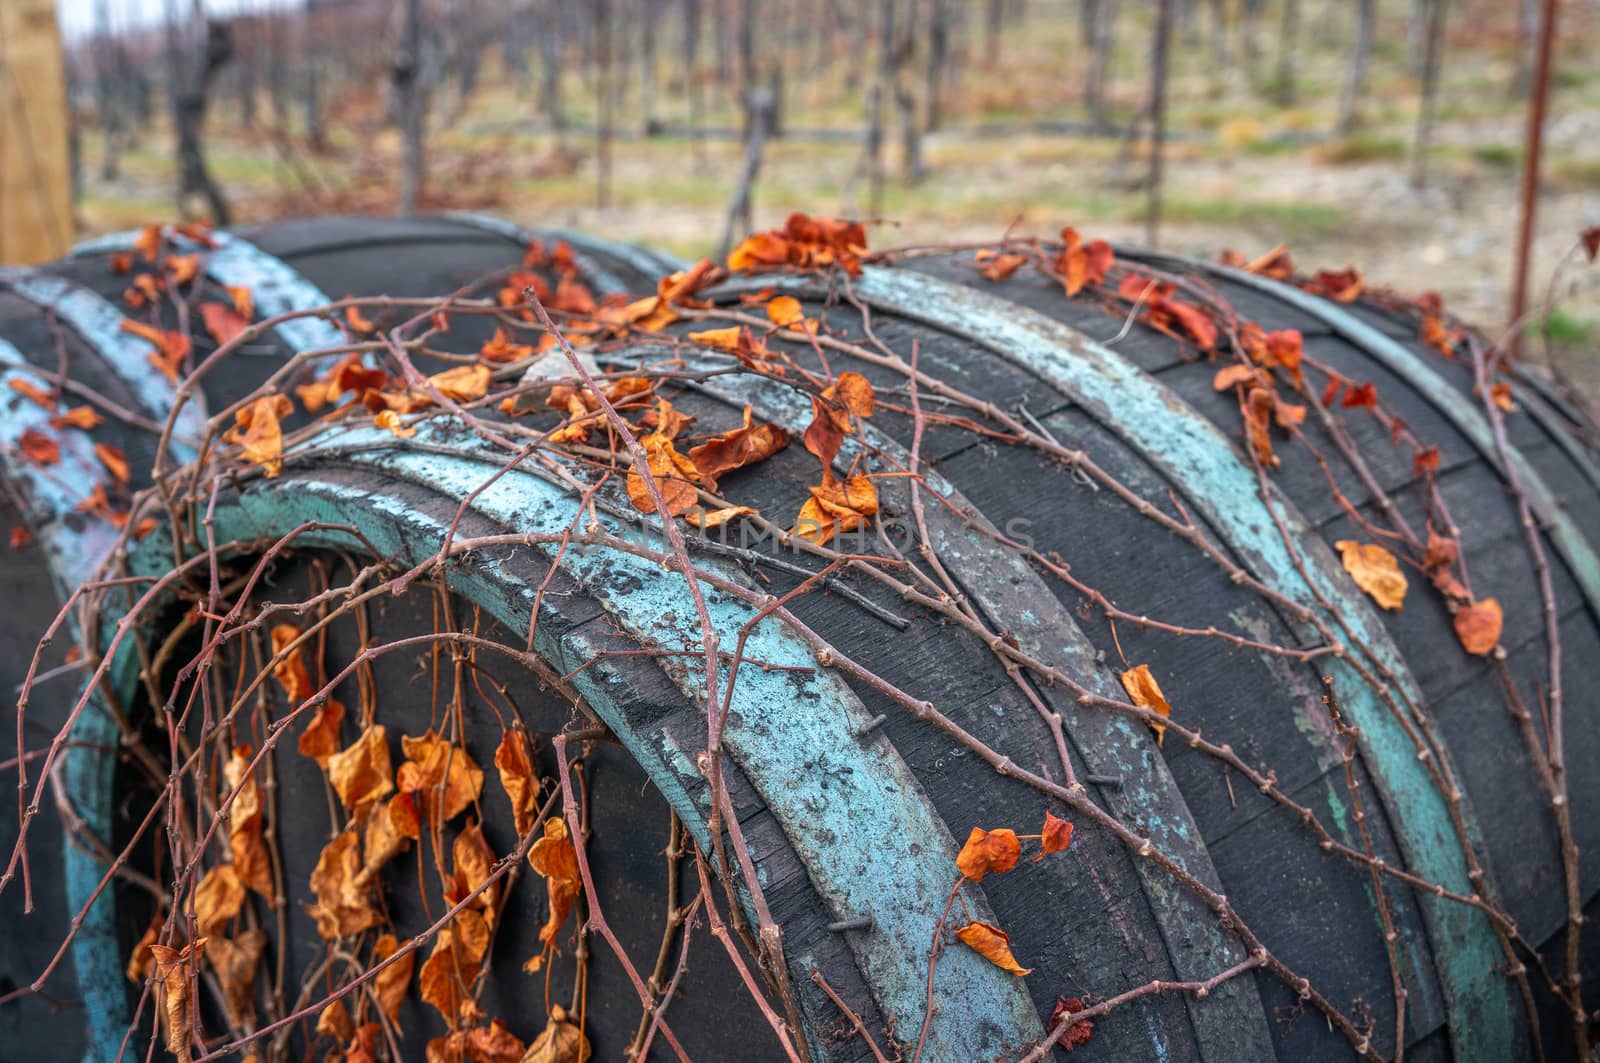 Macro photo of vibrant orange dry leaves growing on vines over vintage wine barrels with peeled off blue paint on the brass. Blurred background showing St. Claires vineyard in Troja, Prague. Fall season themed shot in daylight